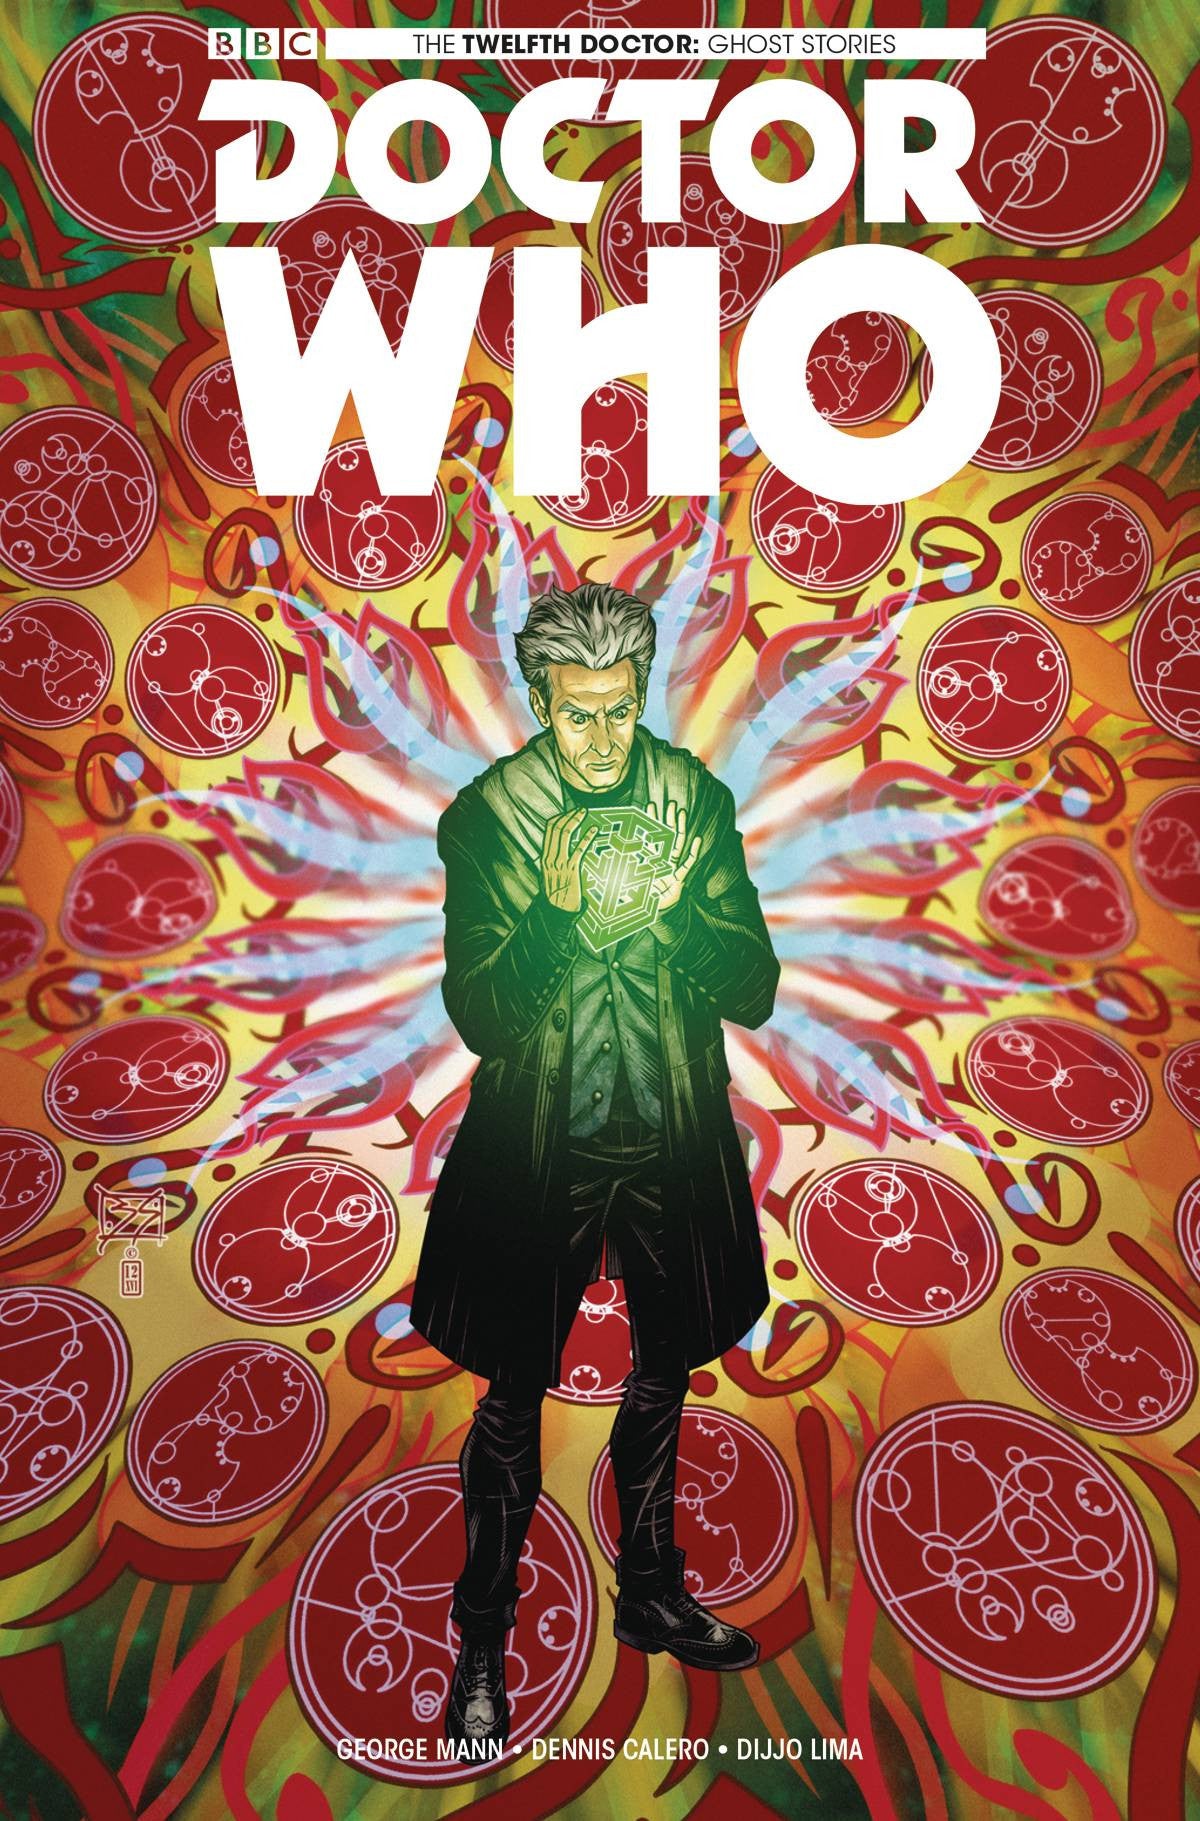 DOCTOR WHO GHOST STORIES #3 (OF 4) CVR A SHEDD COVER